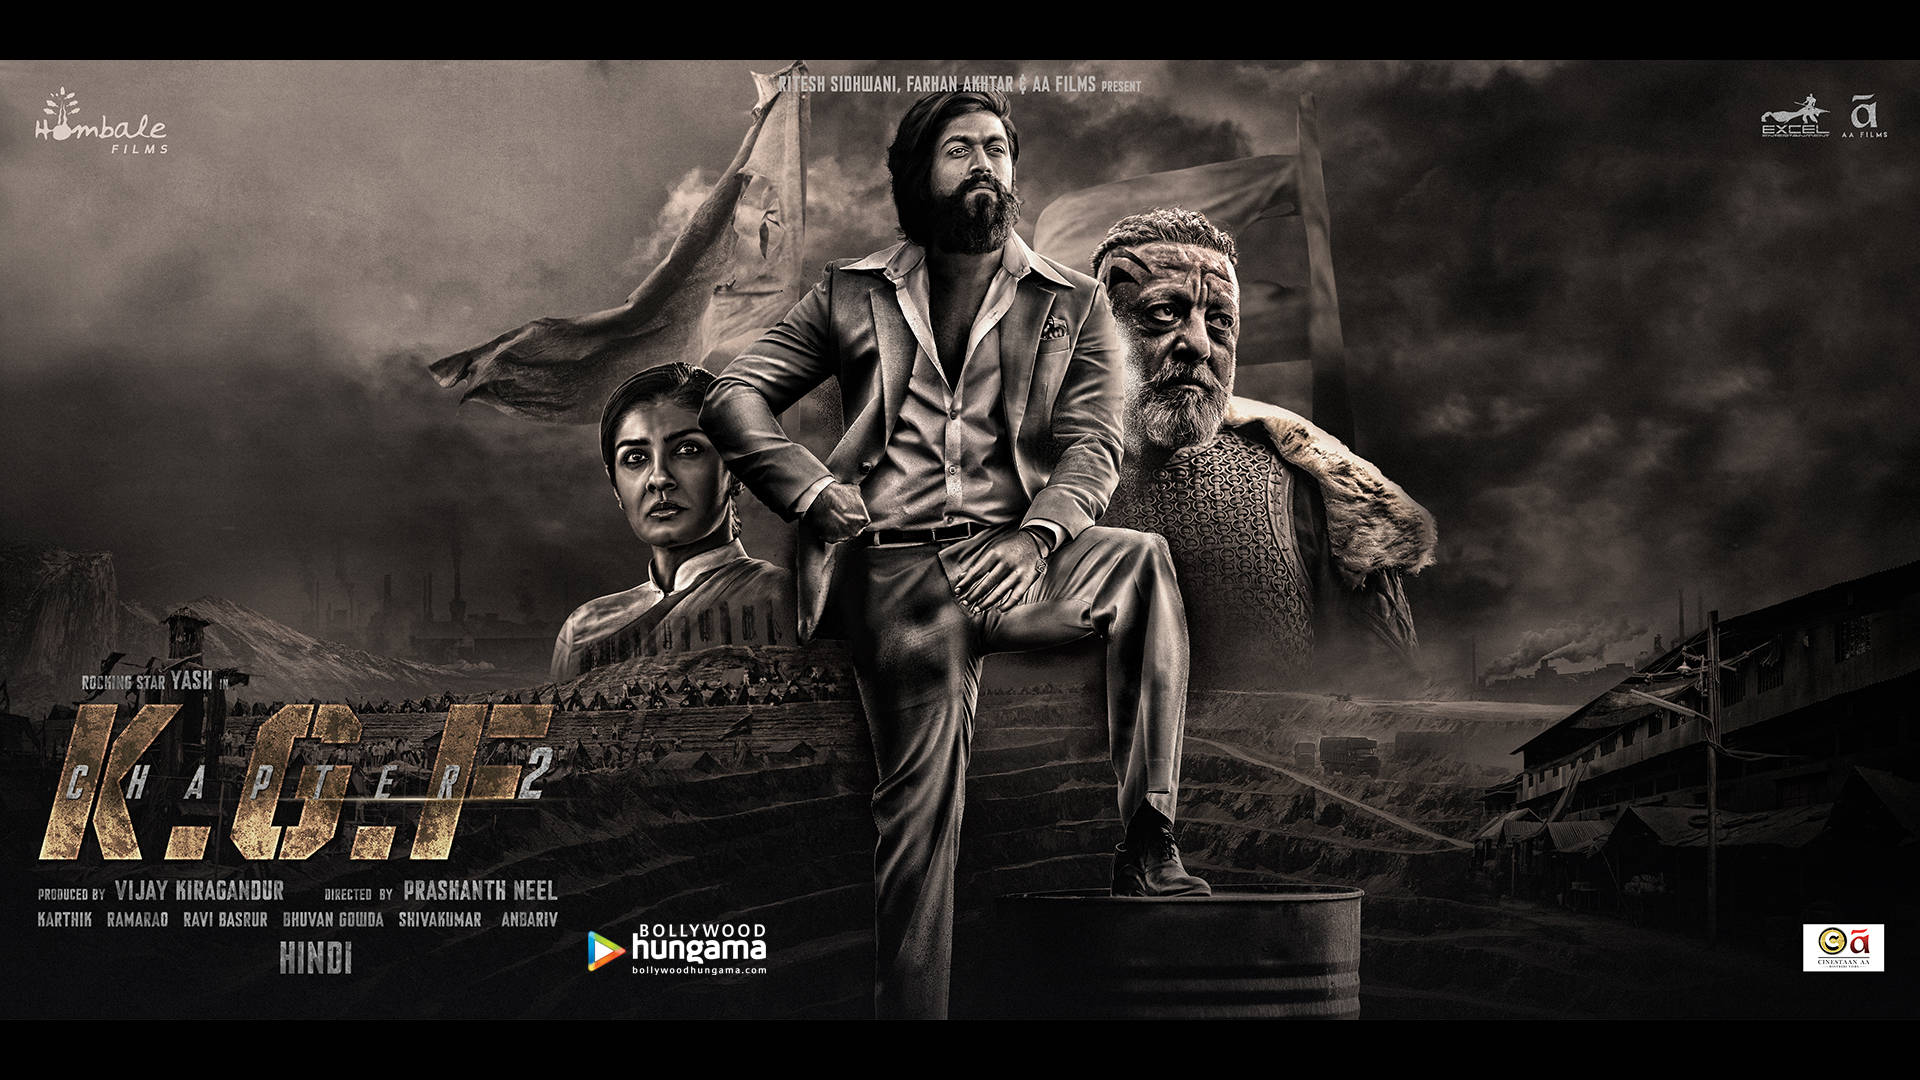 KGF Chapter 2 Movie Poster Photo Editing Tutorial in Picsart  Step by Step  in Hindi  Taukeer Editz  YouTube